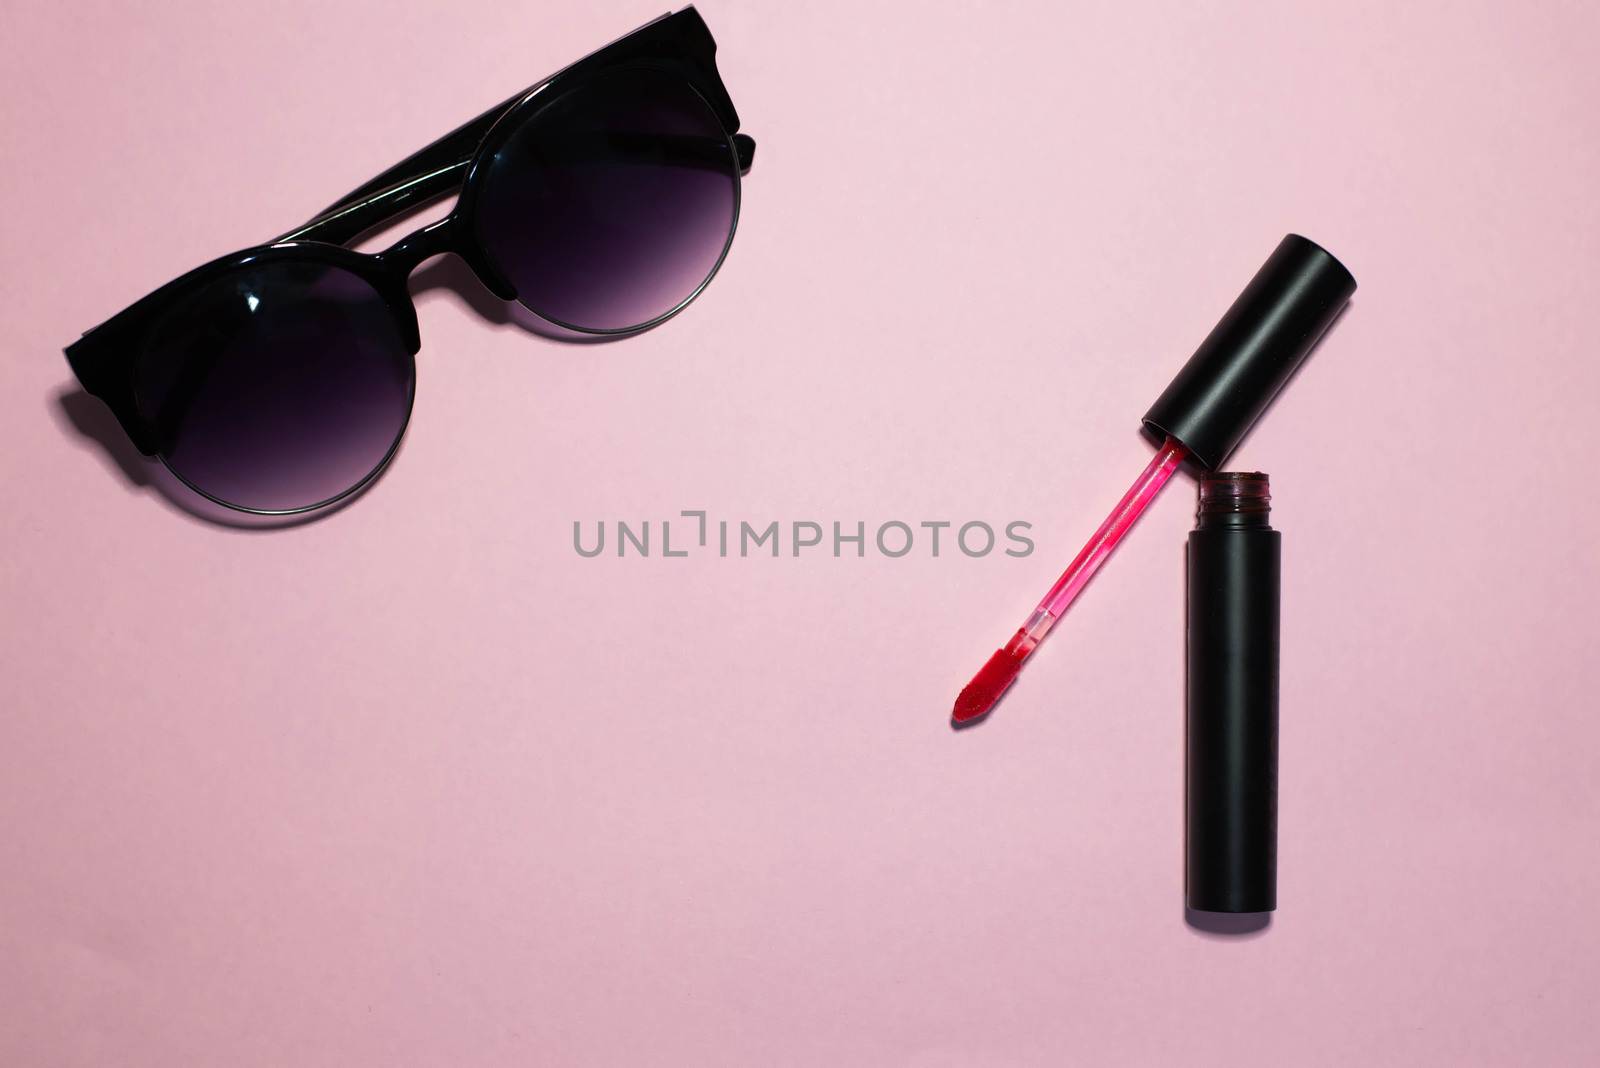 Sunglasses and cosmetics on a pink background by SemFid